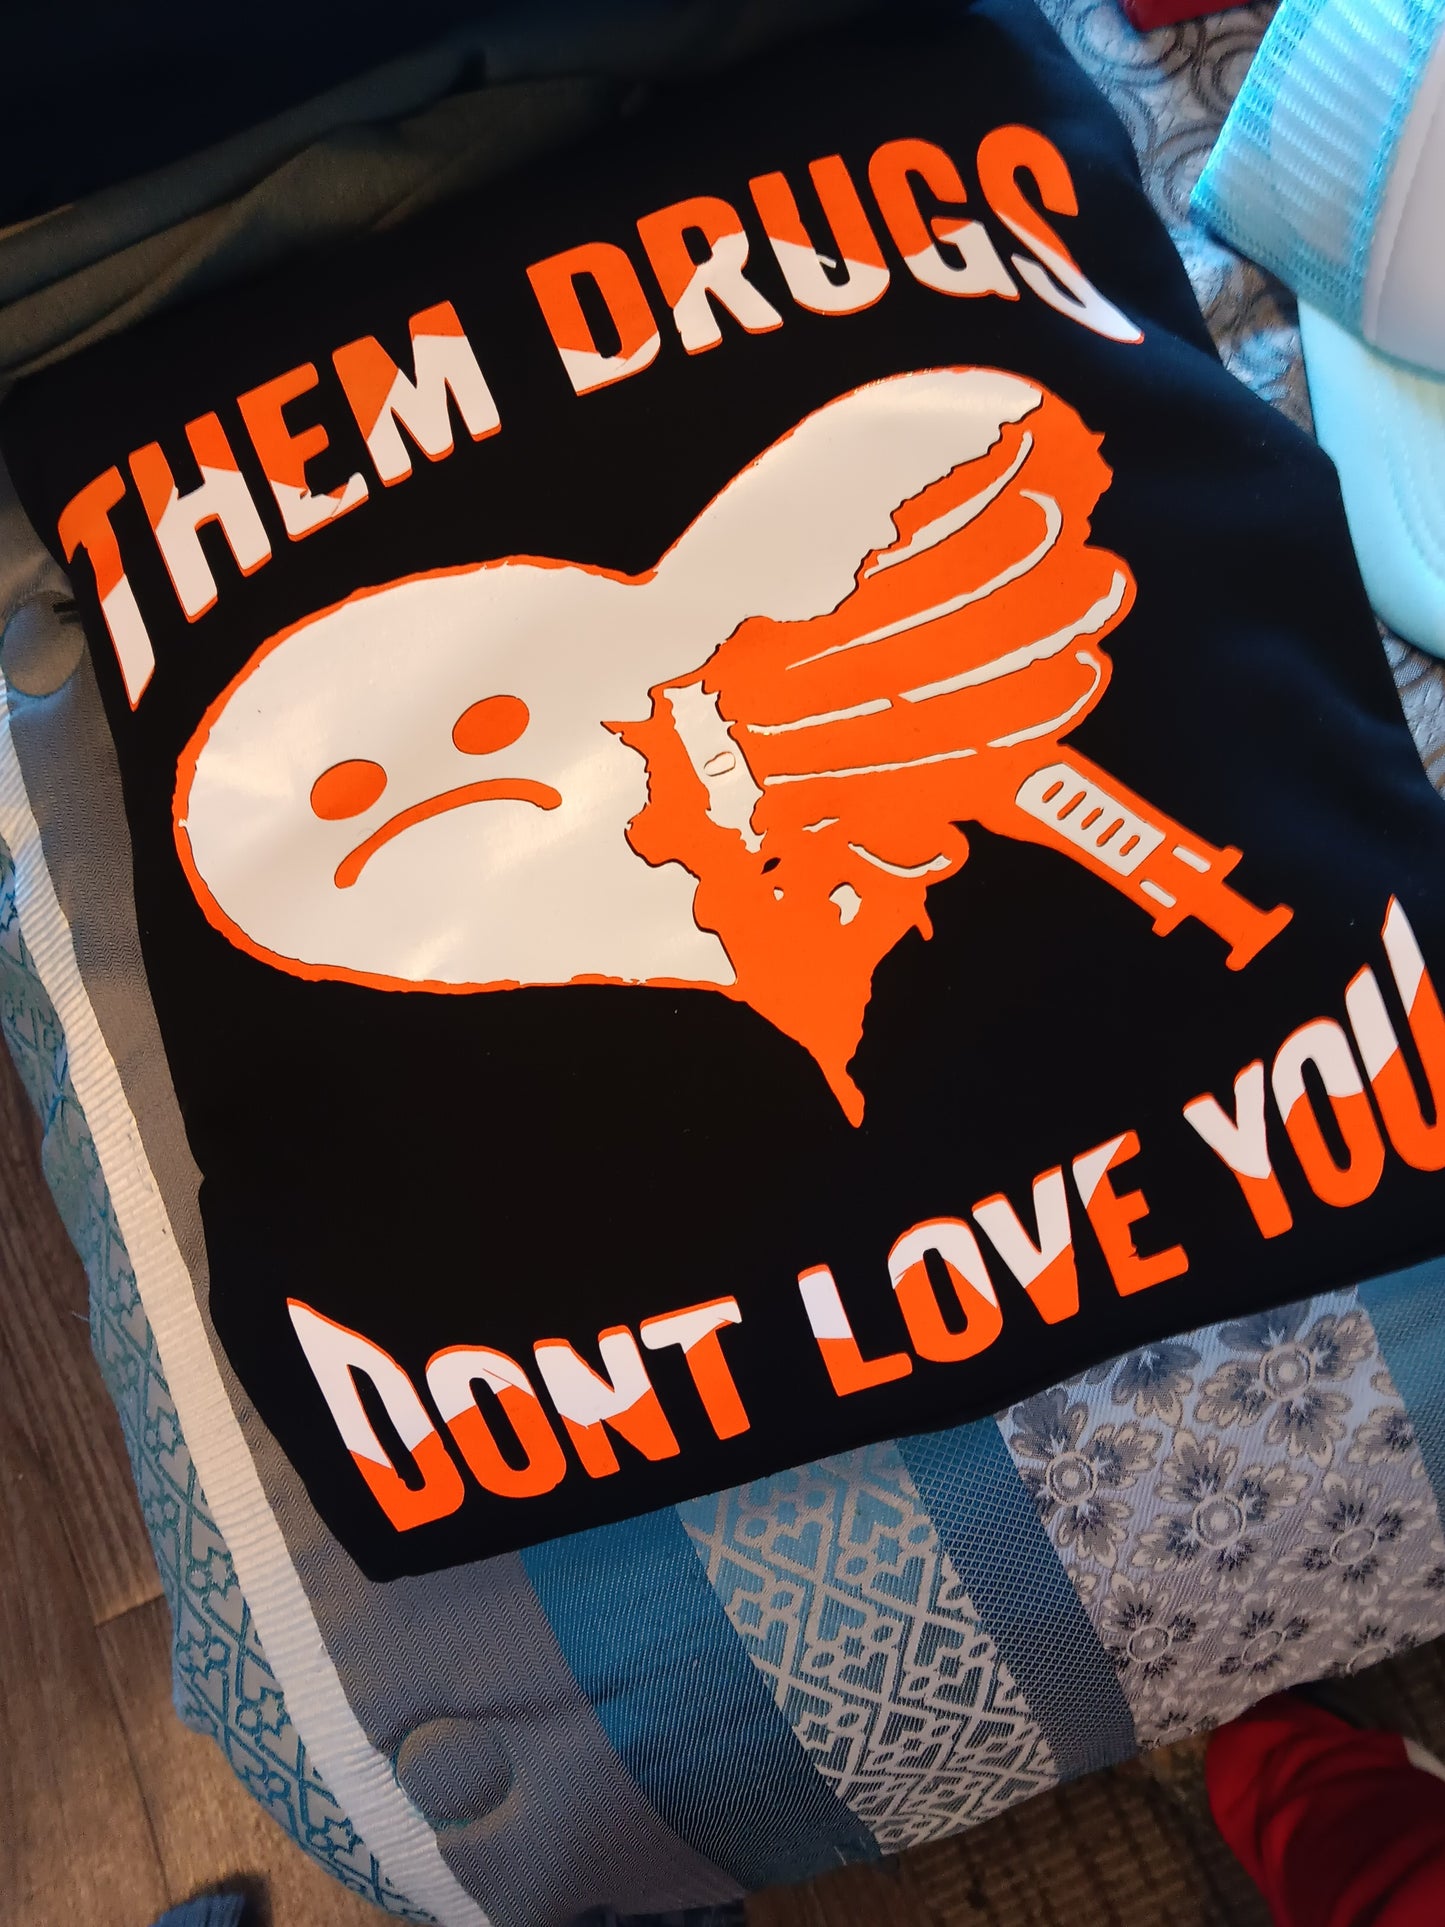 Them drugs dont love you hoodie